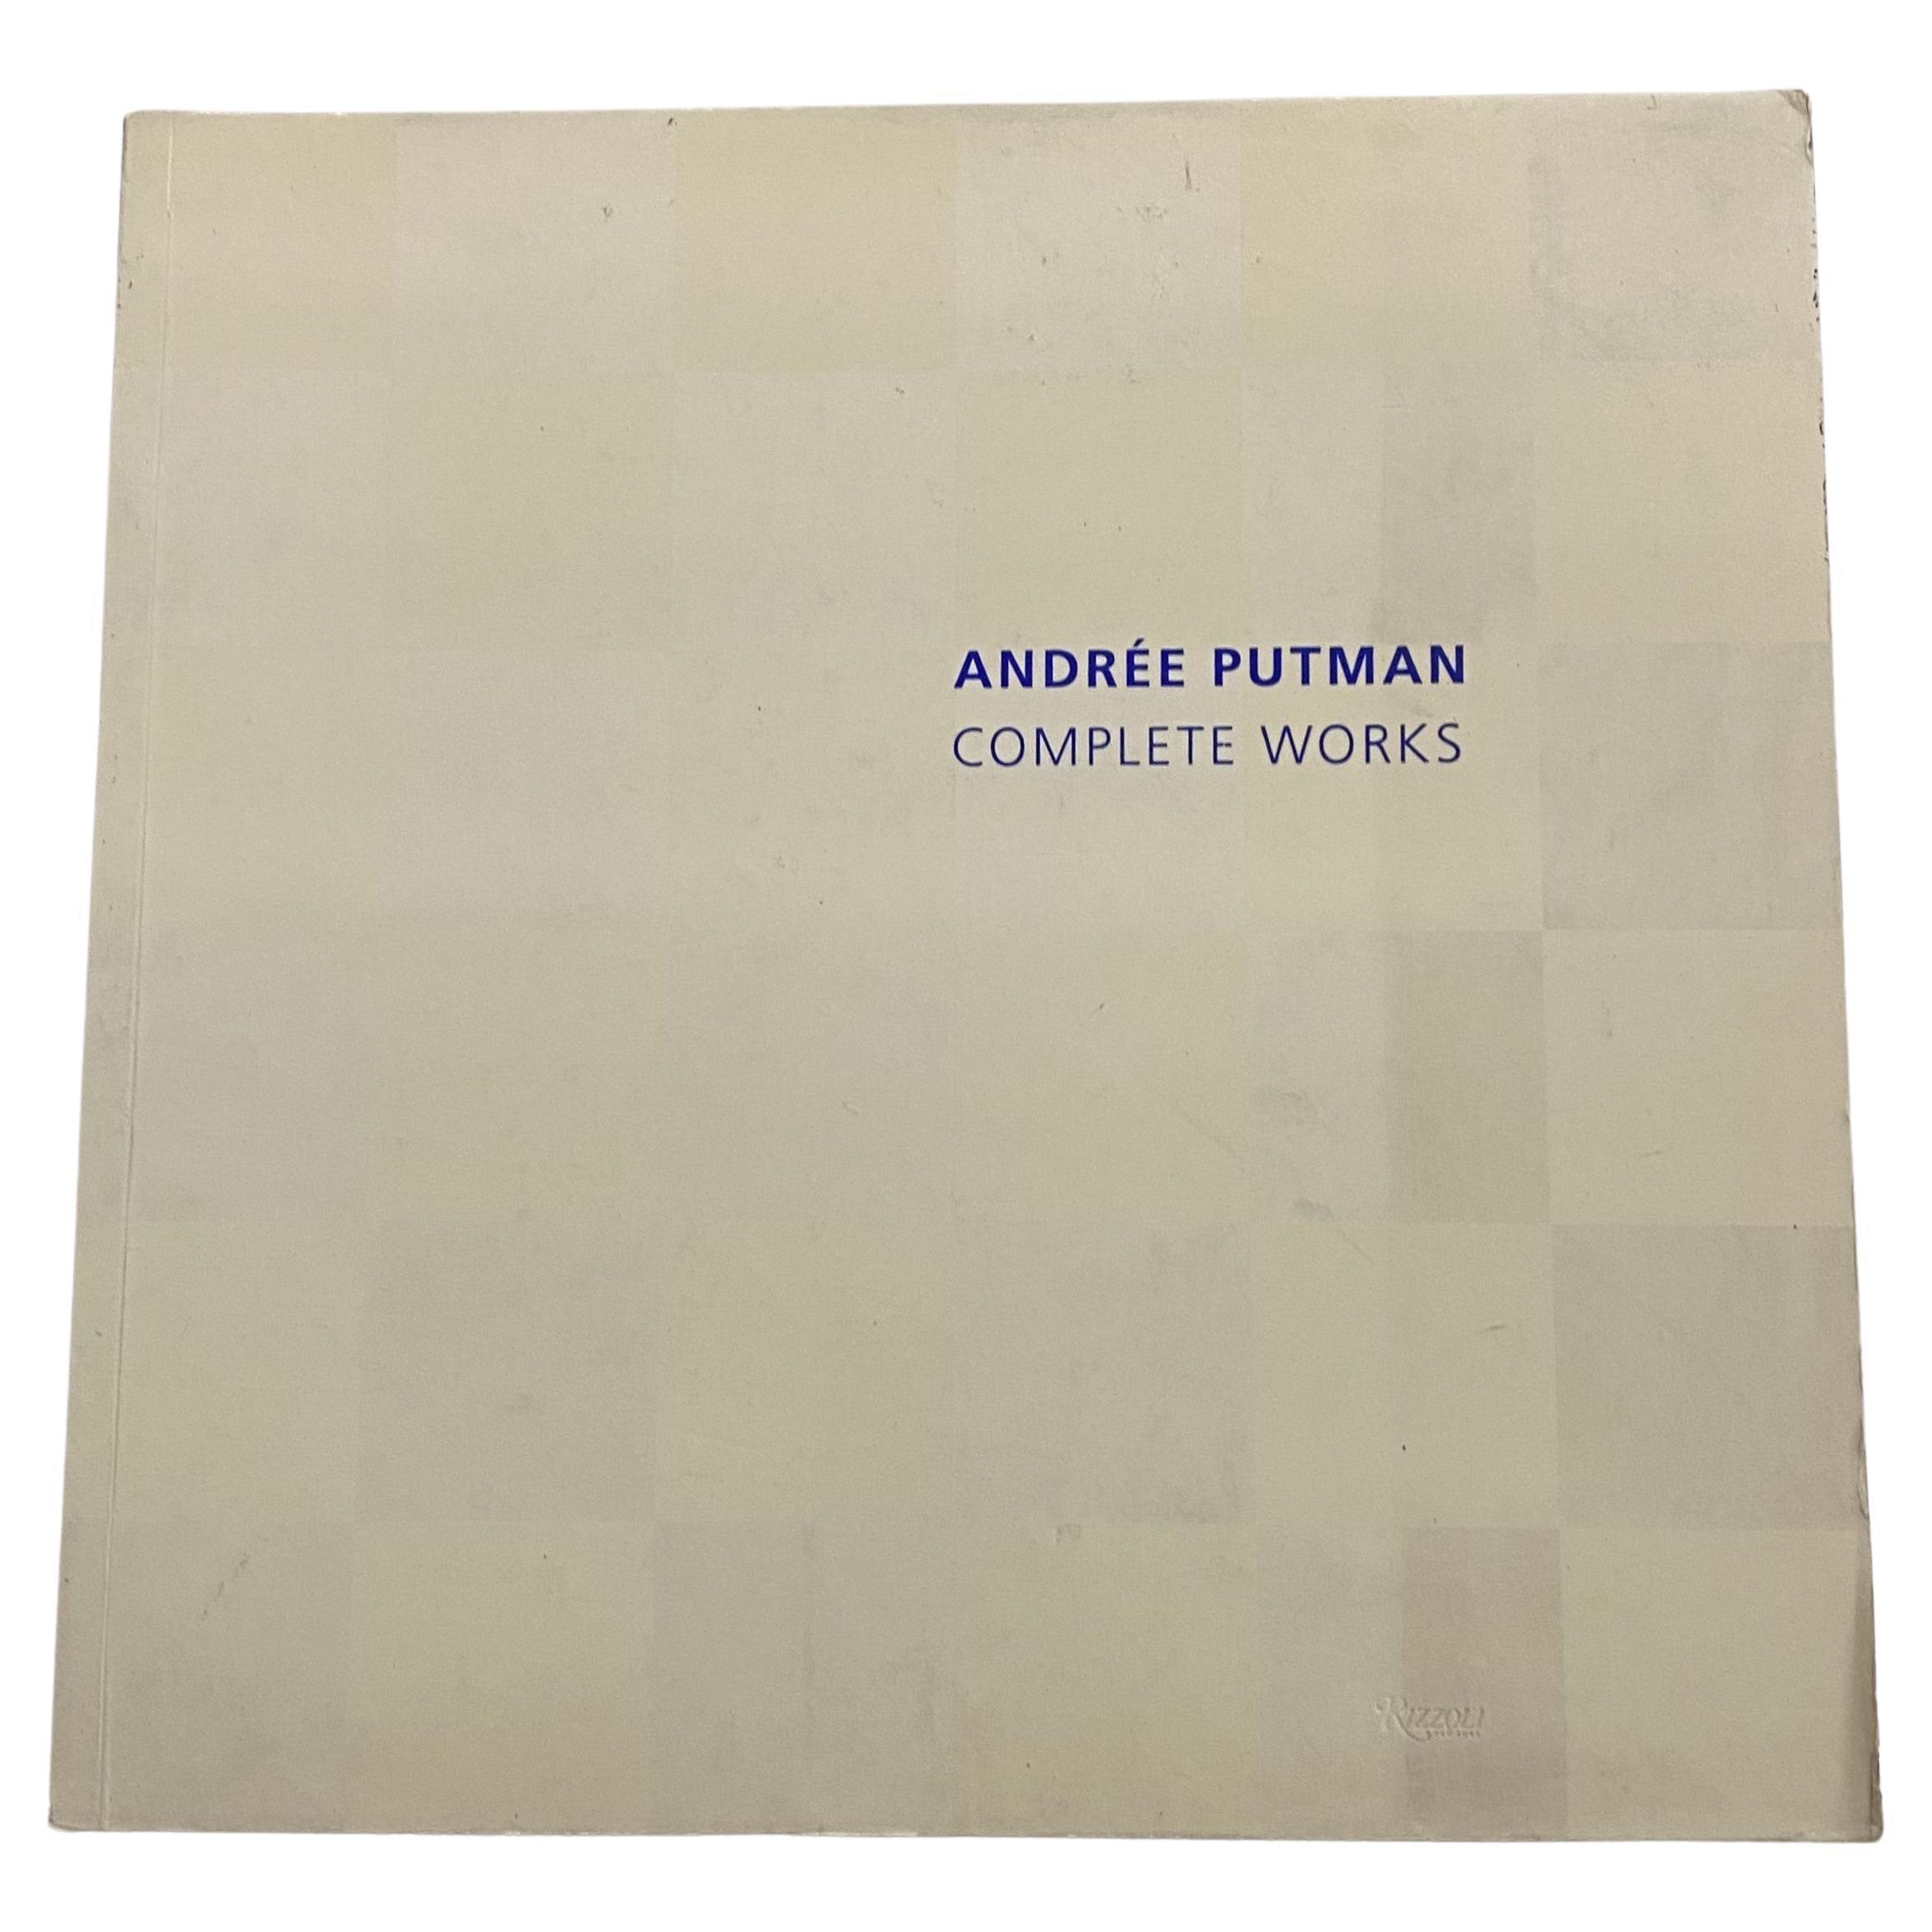 Andree Putman Complete Works by Donald Albrecht